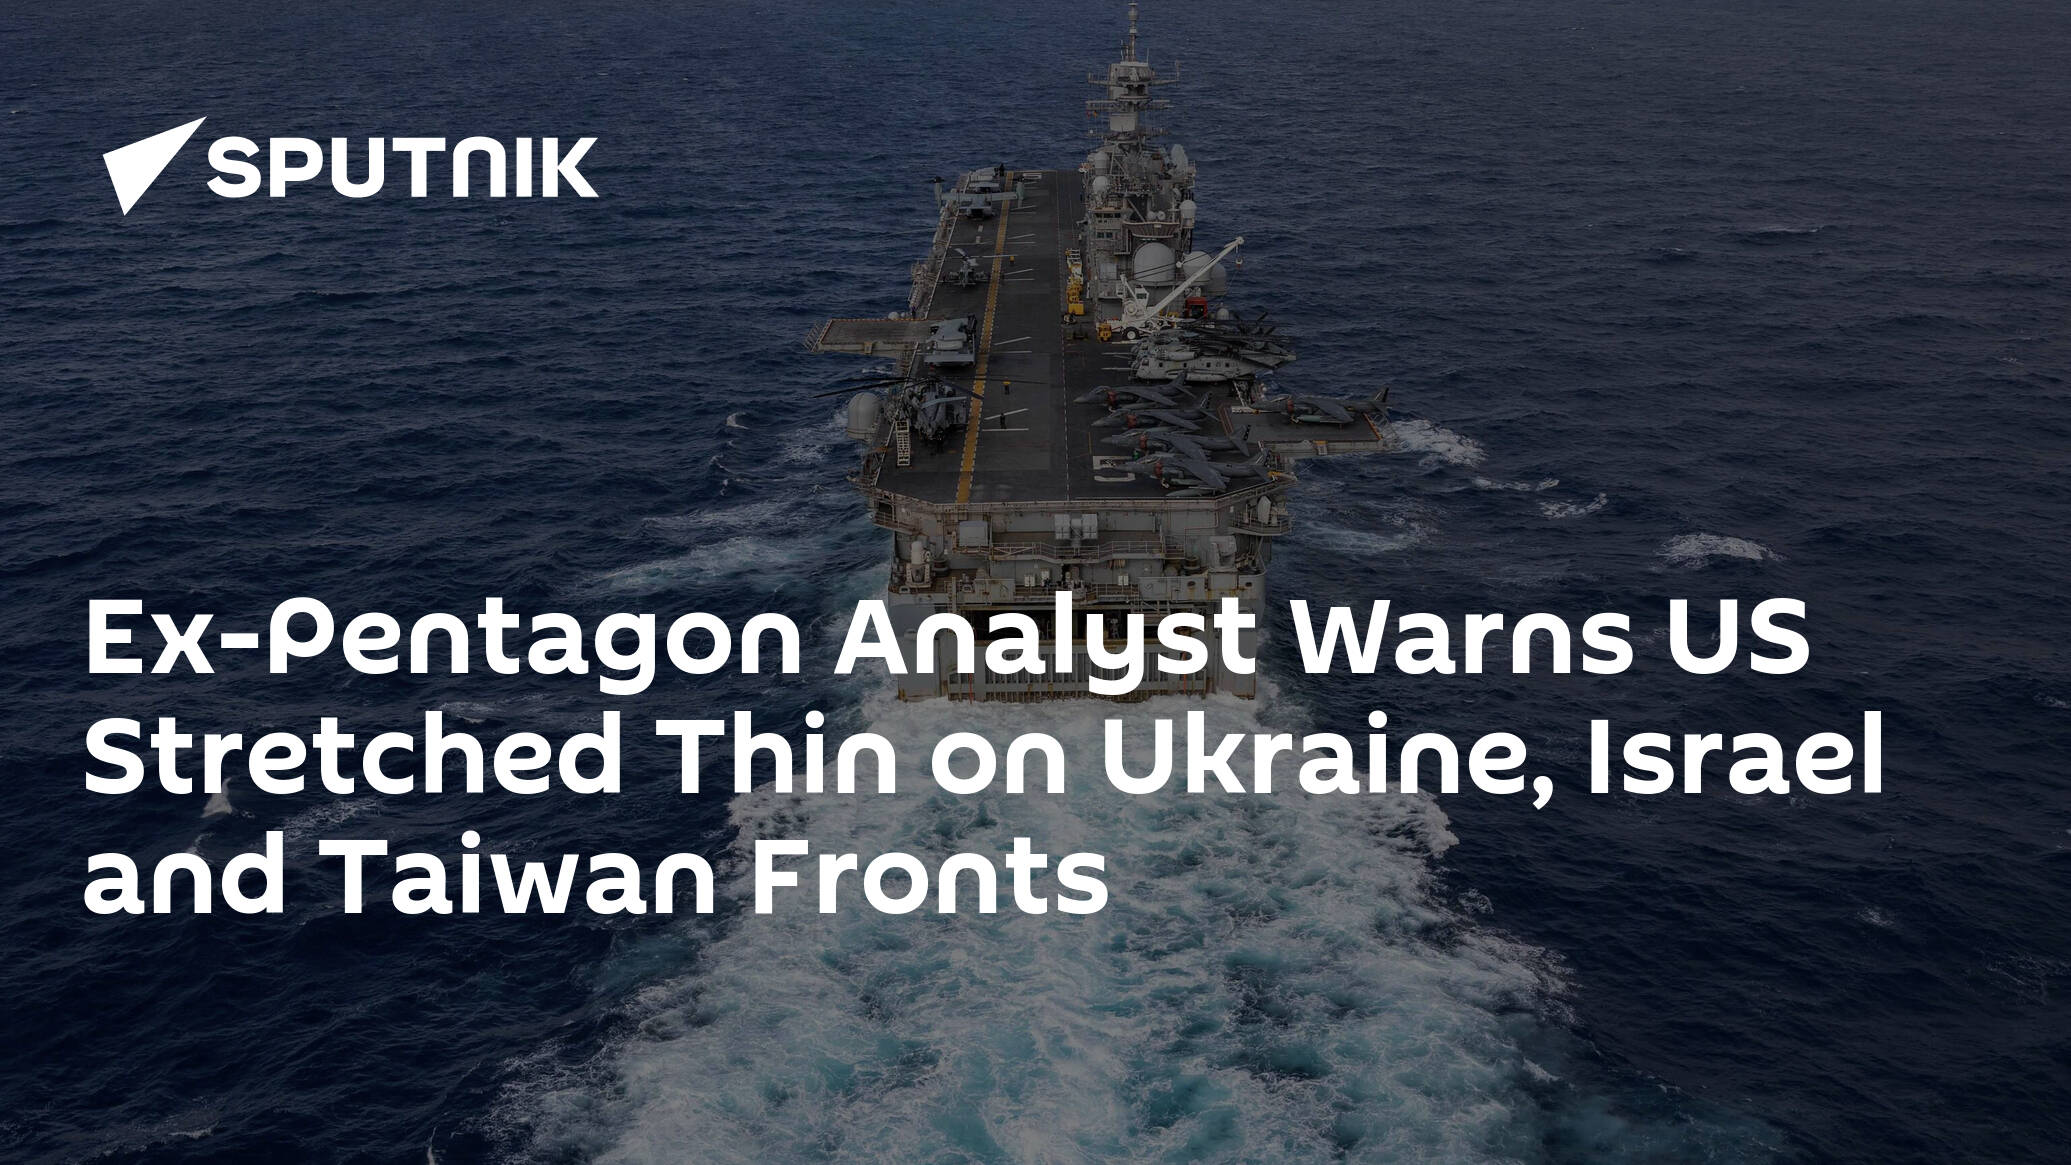 Ex-Pentagon Analyst Warns US Stretched Thin on Ukraine, Israel and Taiwan Fronts